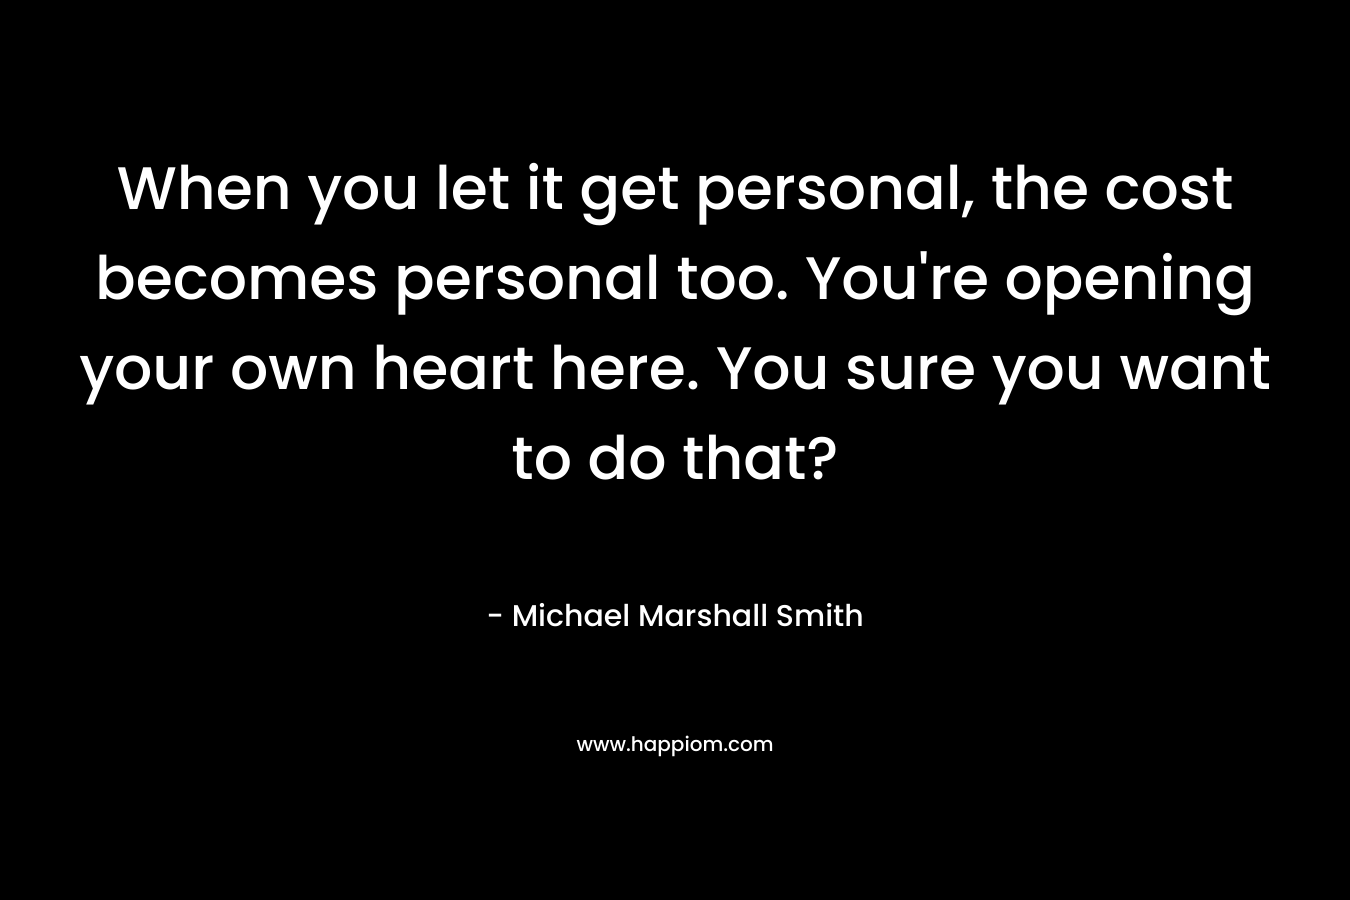 When you let it get personal, the cost becomes personal too. You're opening your own heart here. You sure you want to do that?